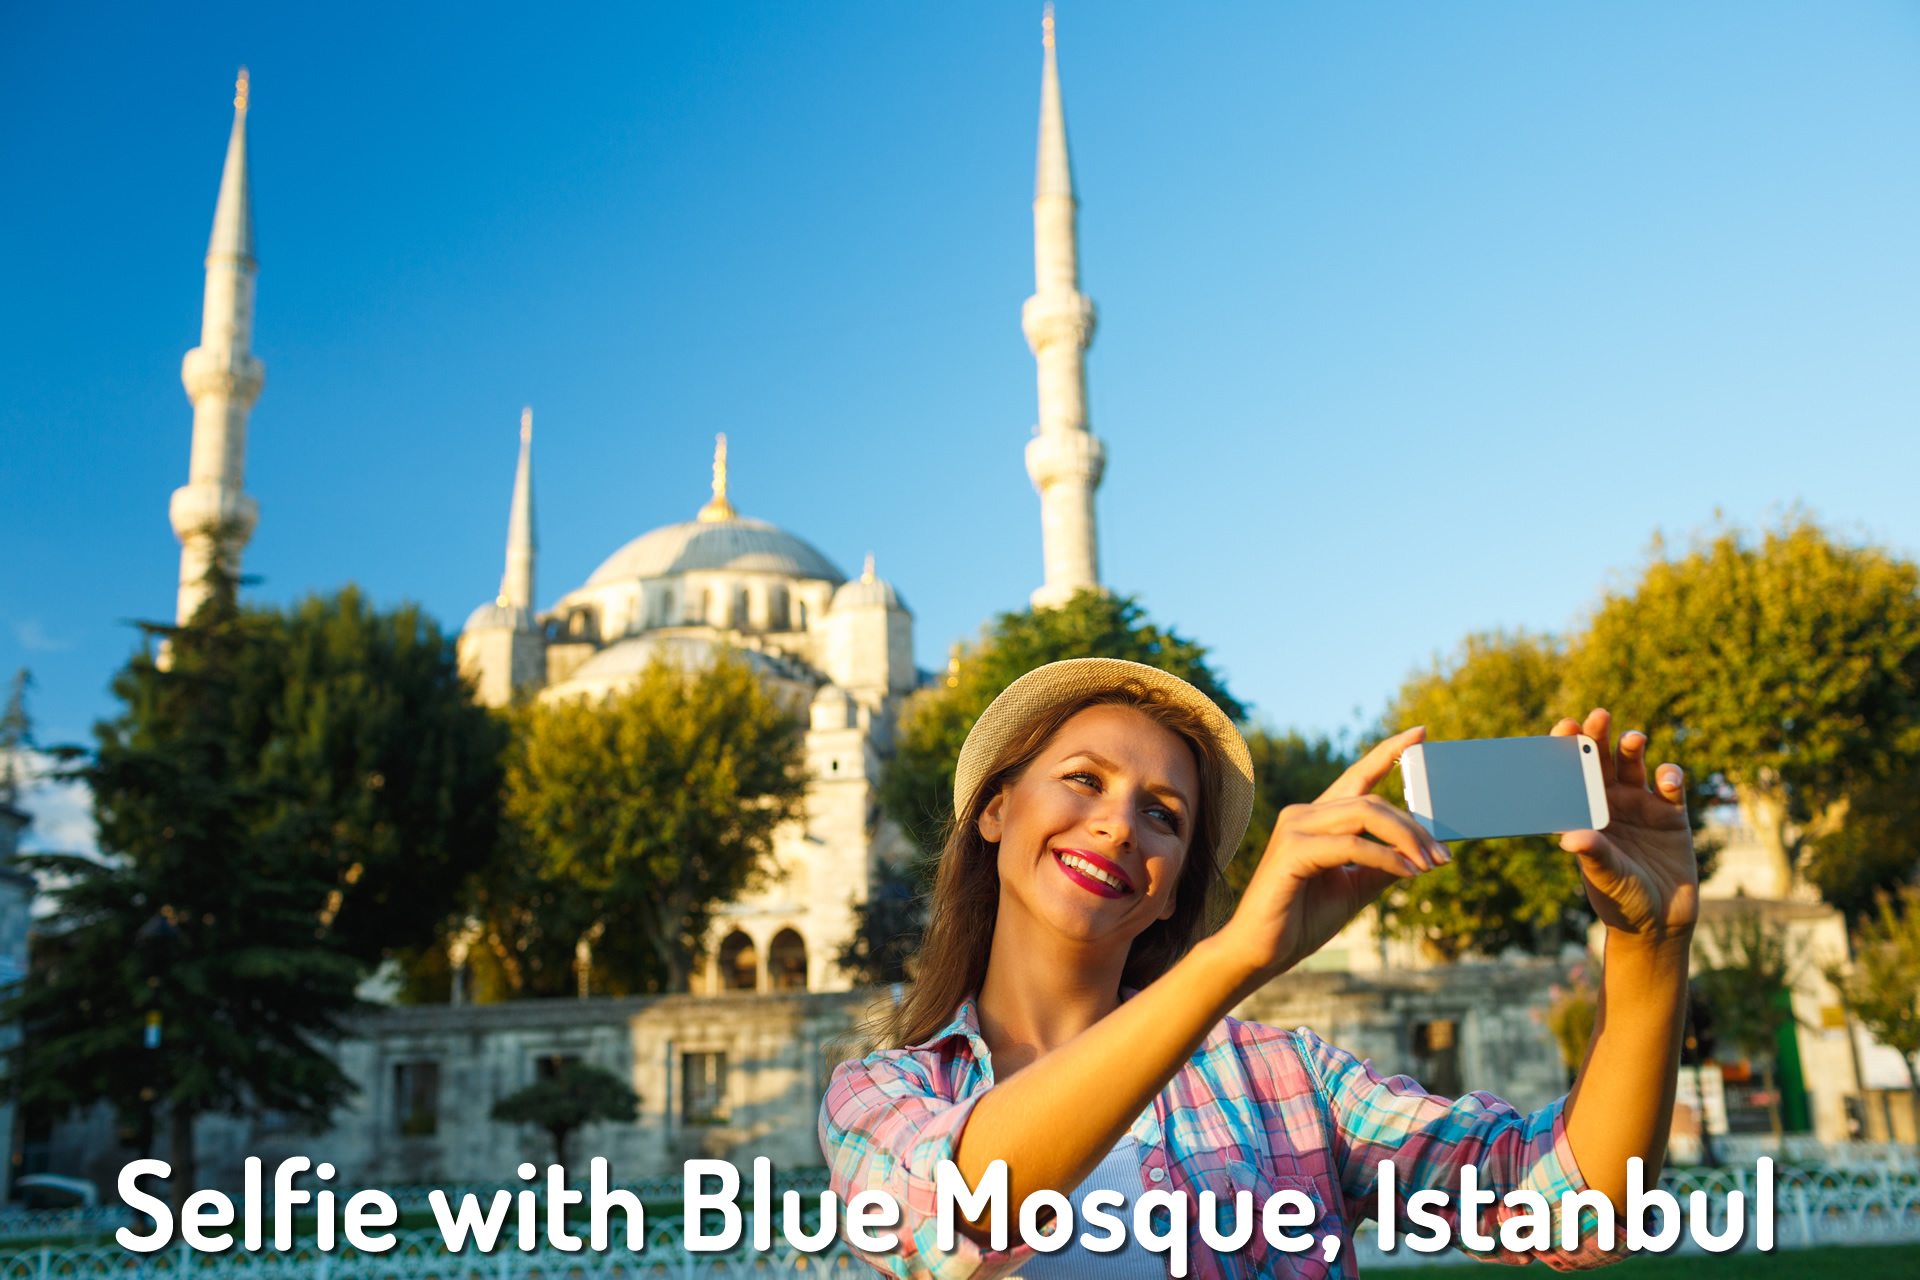 Selfie with Blue Mosque, Istanbul